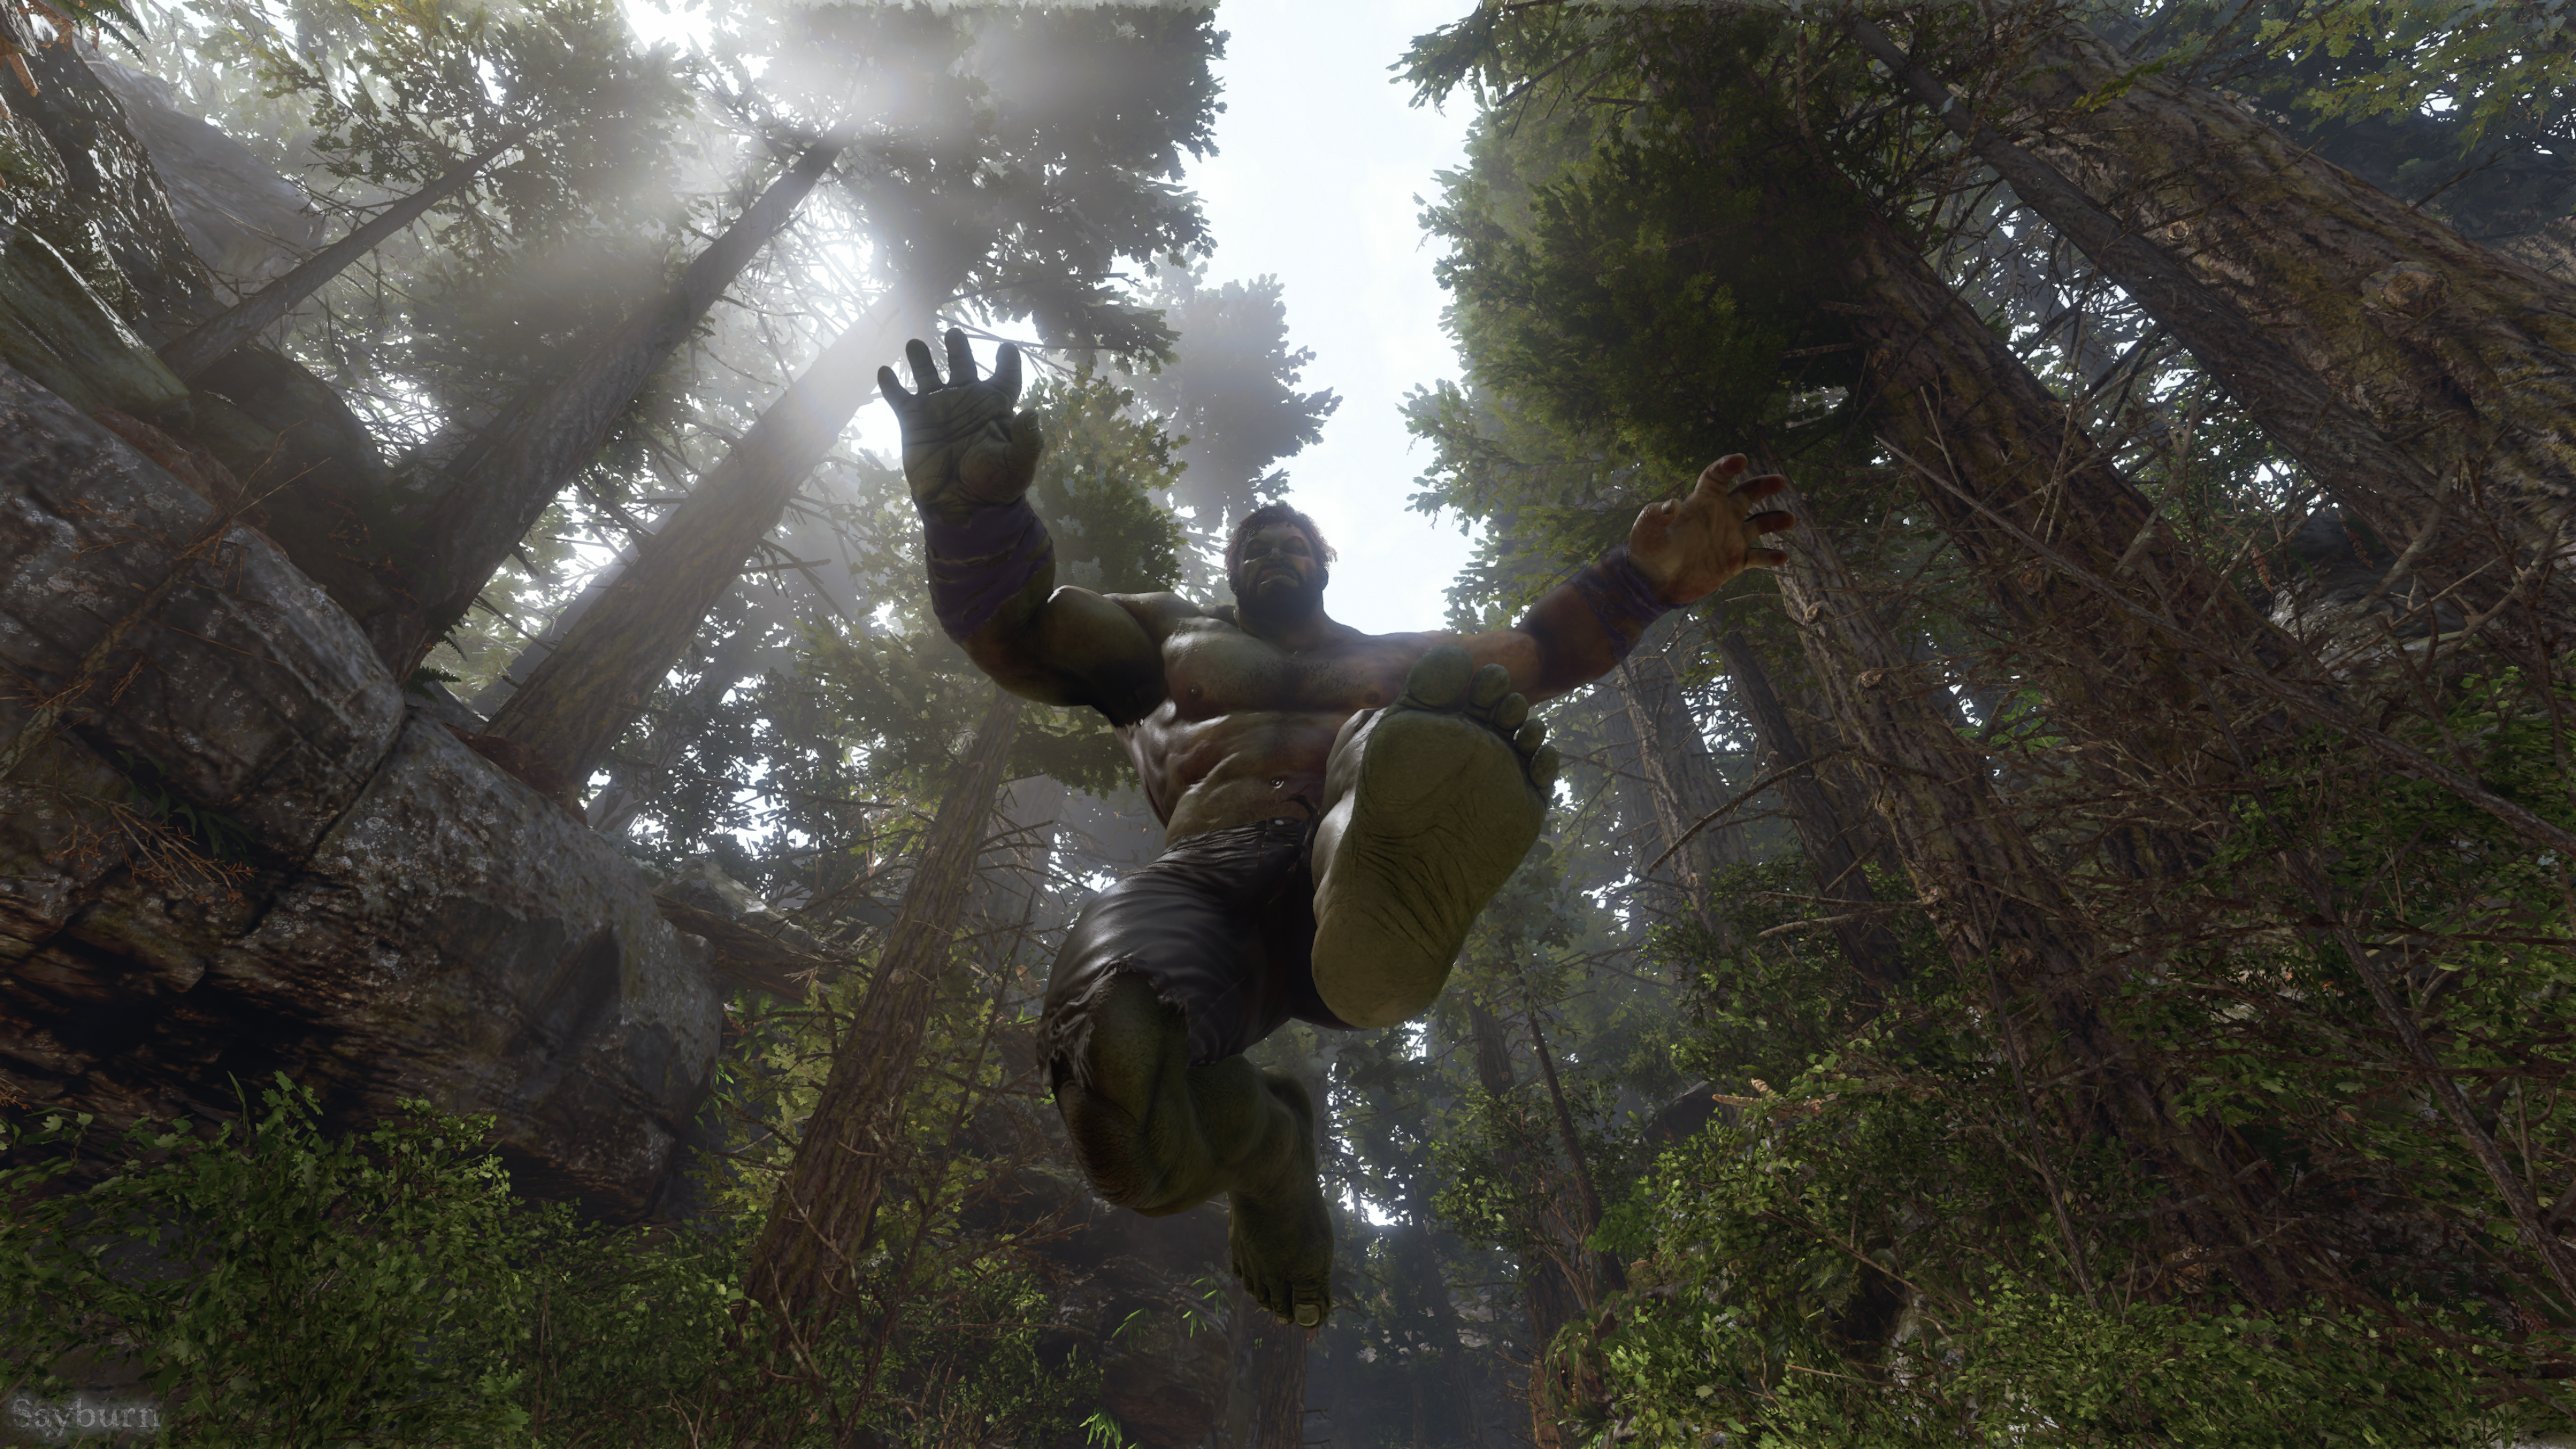 General 3840x2160 superhero jumping worm's eye view forest leaves screen shot Marvel Comics trees Hulk low-angle frontal view